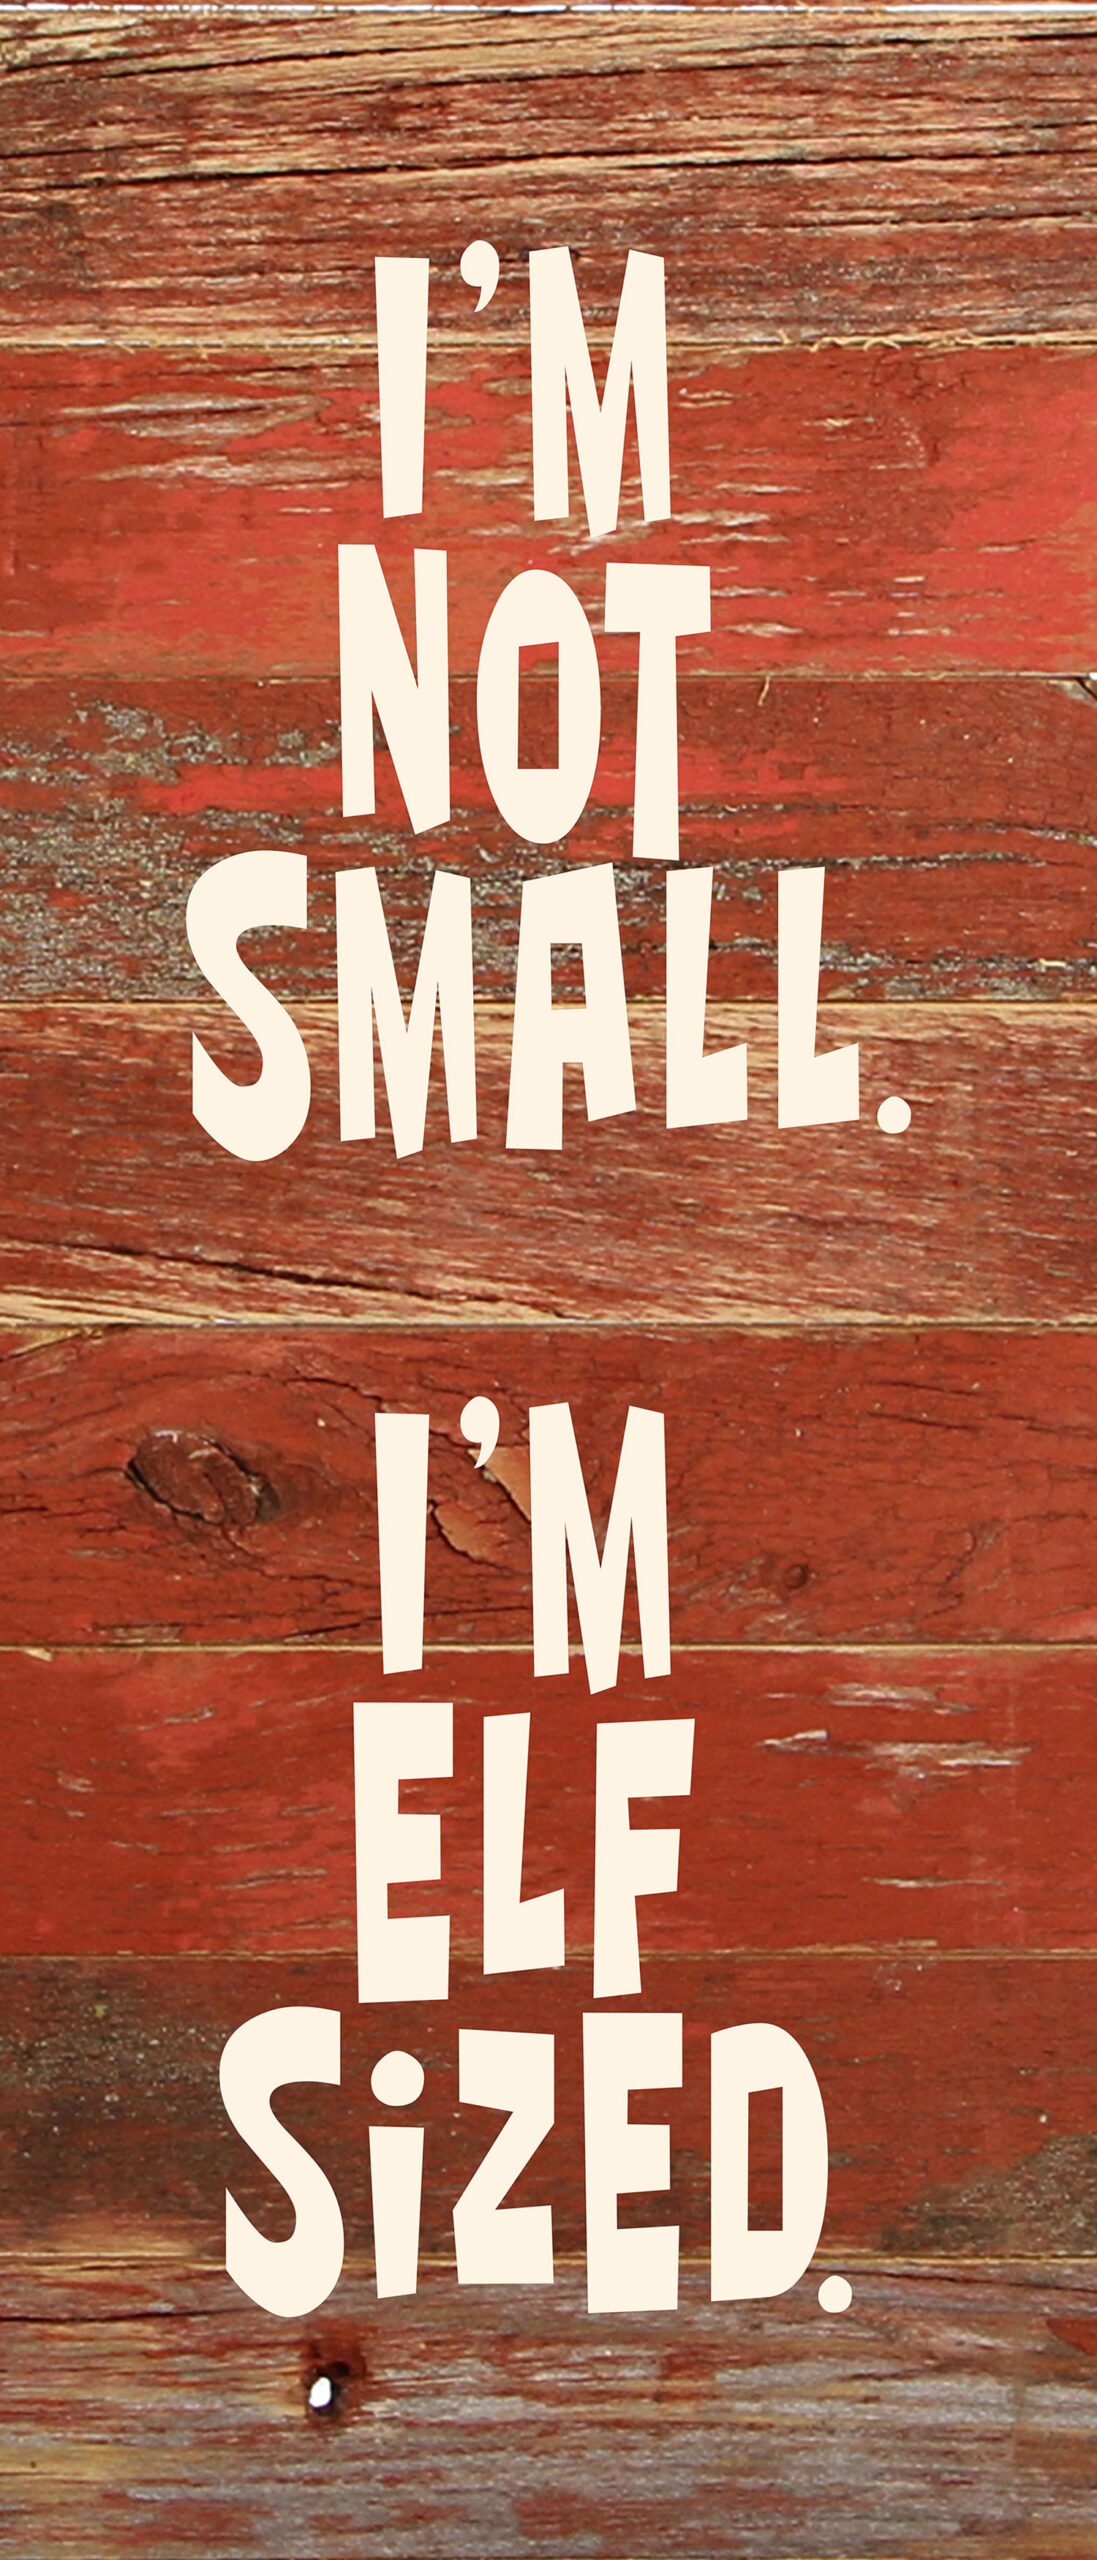 I'm not small. I'm elf sized. / 6"x14" Reclaimed Wood Sign